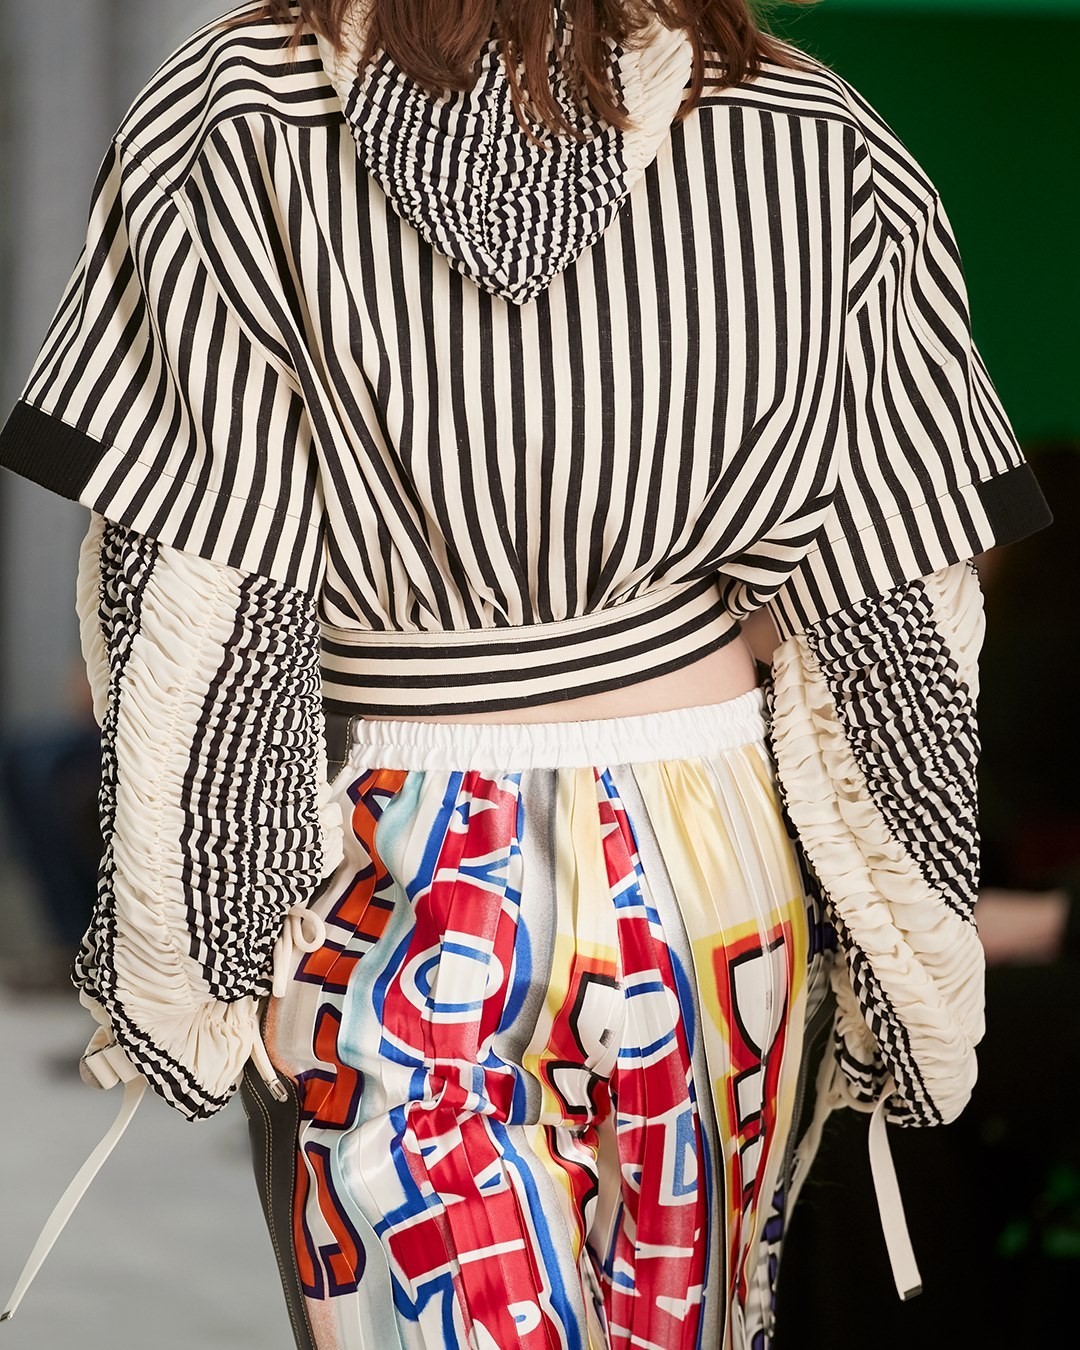 Louis Vuitton - #LVSS21
Bold pairings. Detail of a look from @NicolasGhesquiere’s latest #LouisVuitton Collection. See more from the Fashion Show at louisvuitton.com